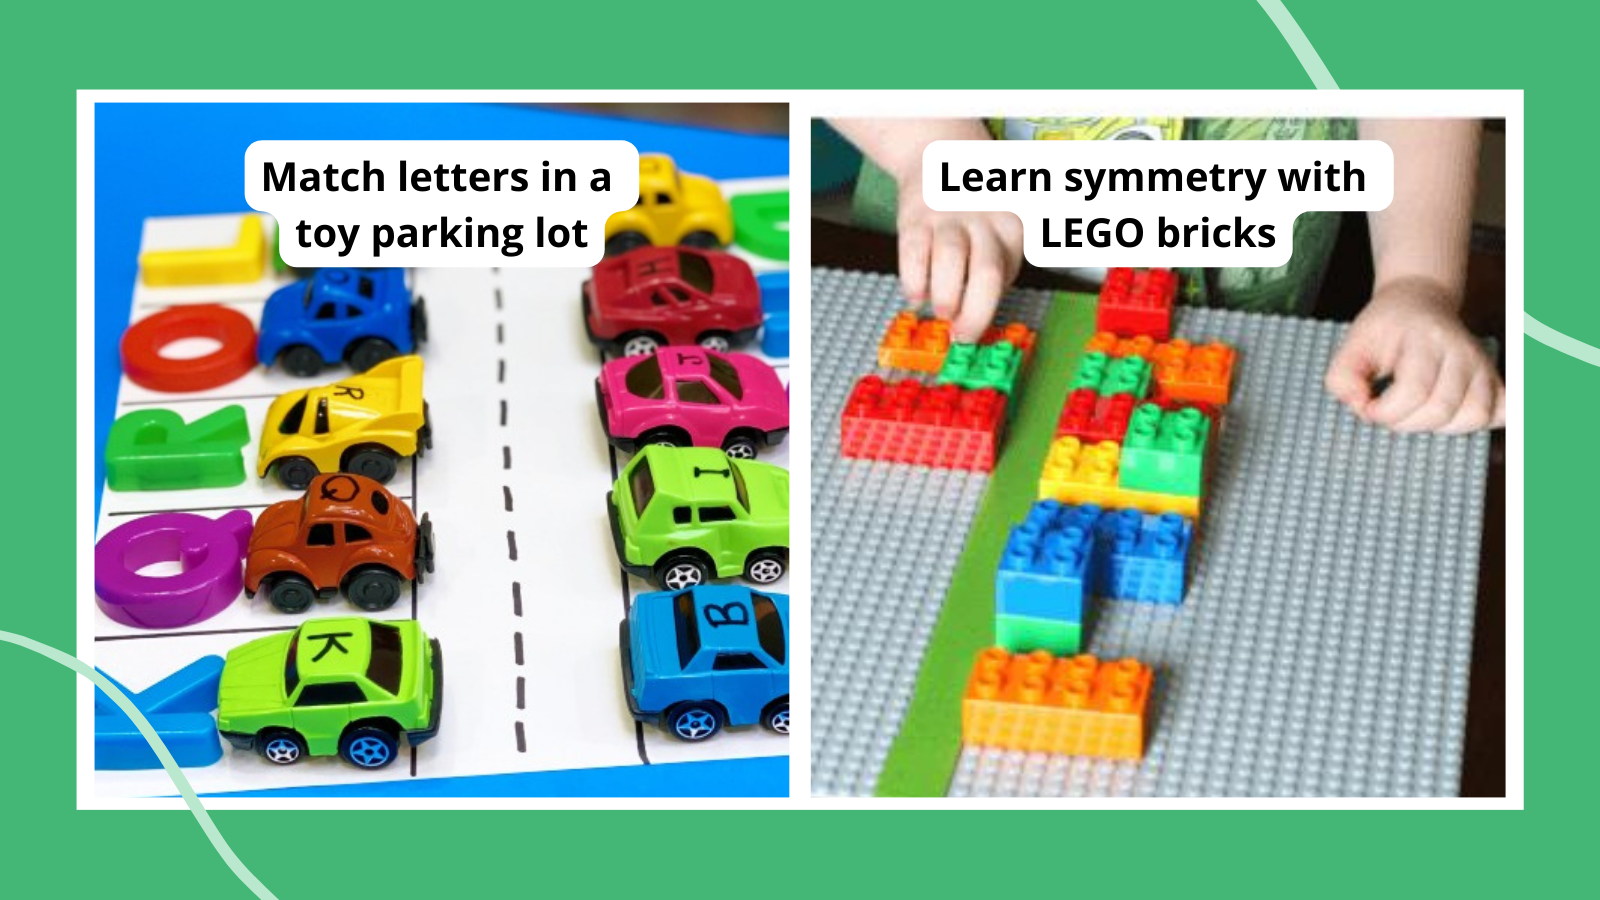 Examples of preschool activities including matching letters in a toy car parking lot and learning symmetry using LEGO bricks.